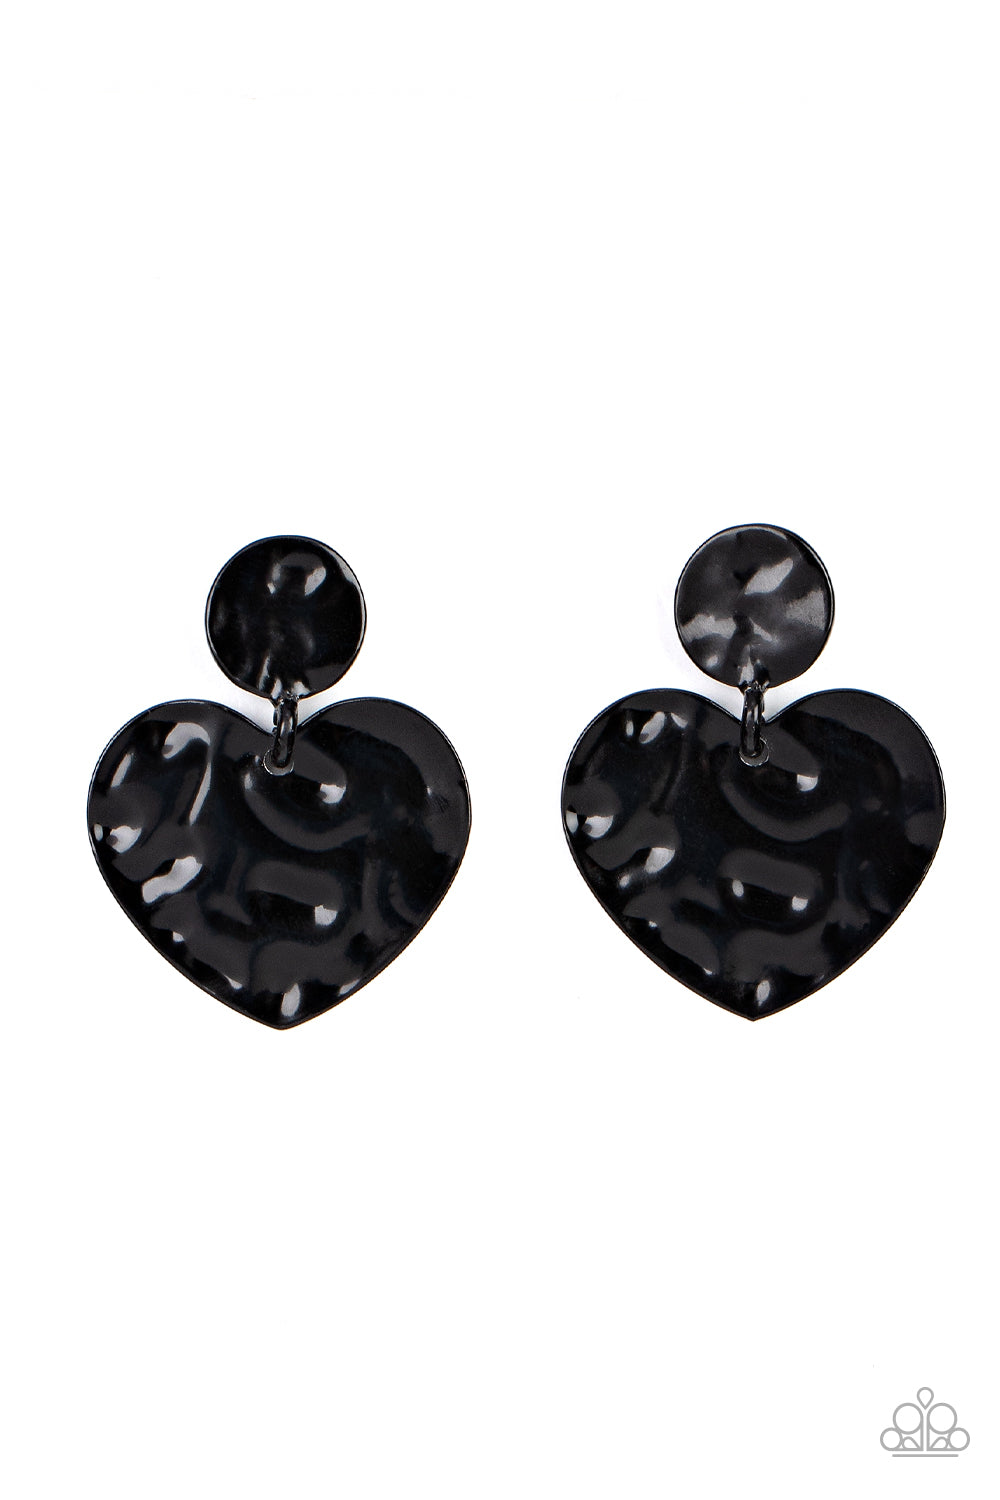 Just a Little Crush - Black Hammered Heart Earrings painted in a glossy black finish, a hammered disc gives way to a hammered heart frame for a flirtatious fashion. Earring attaches to a standard post fitting.  Sold as one pair of post earrings.  Paparazzi Jewelry is lead and nickel free so it's perfect for sensitive skin too!